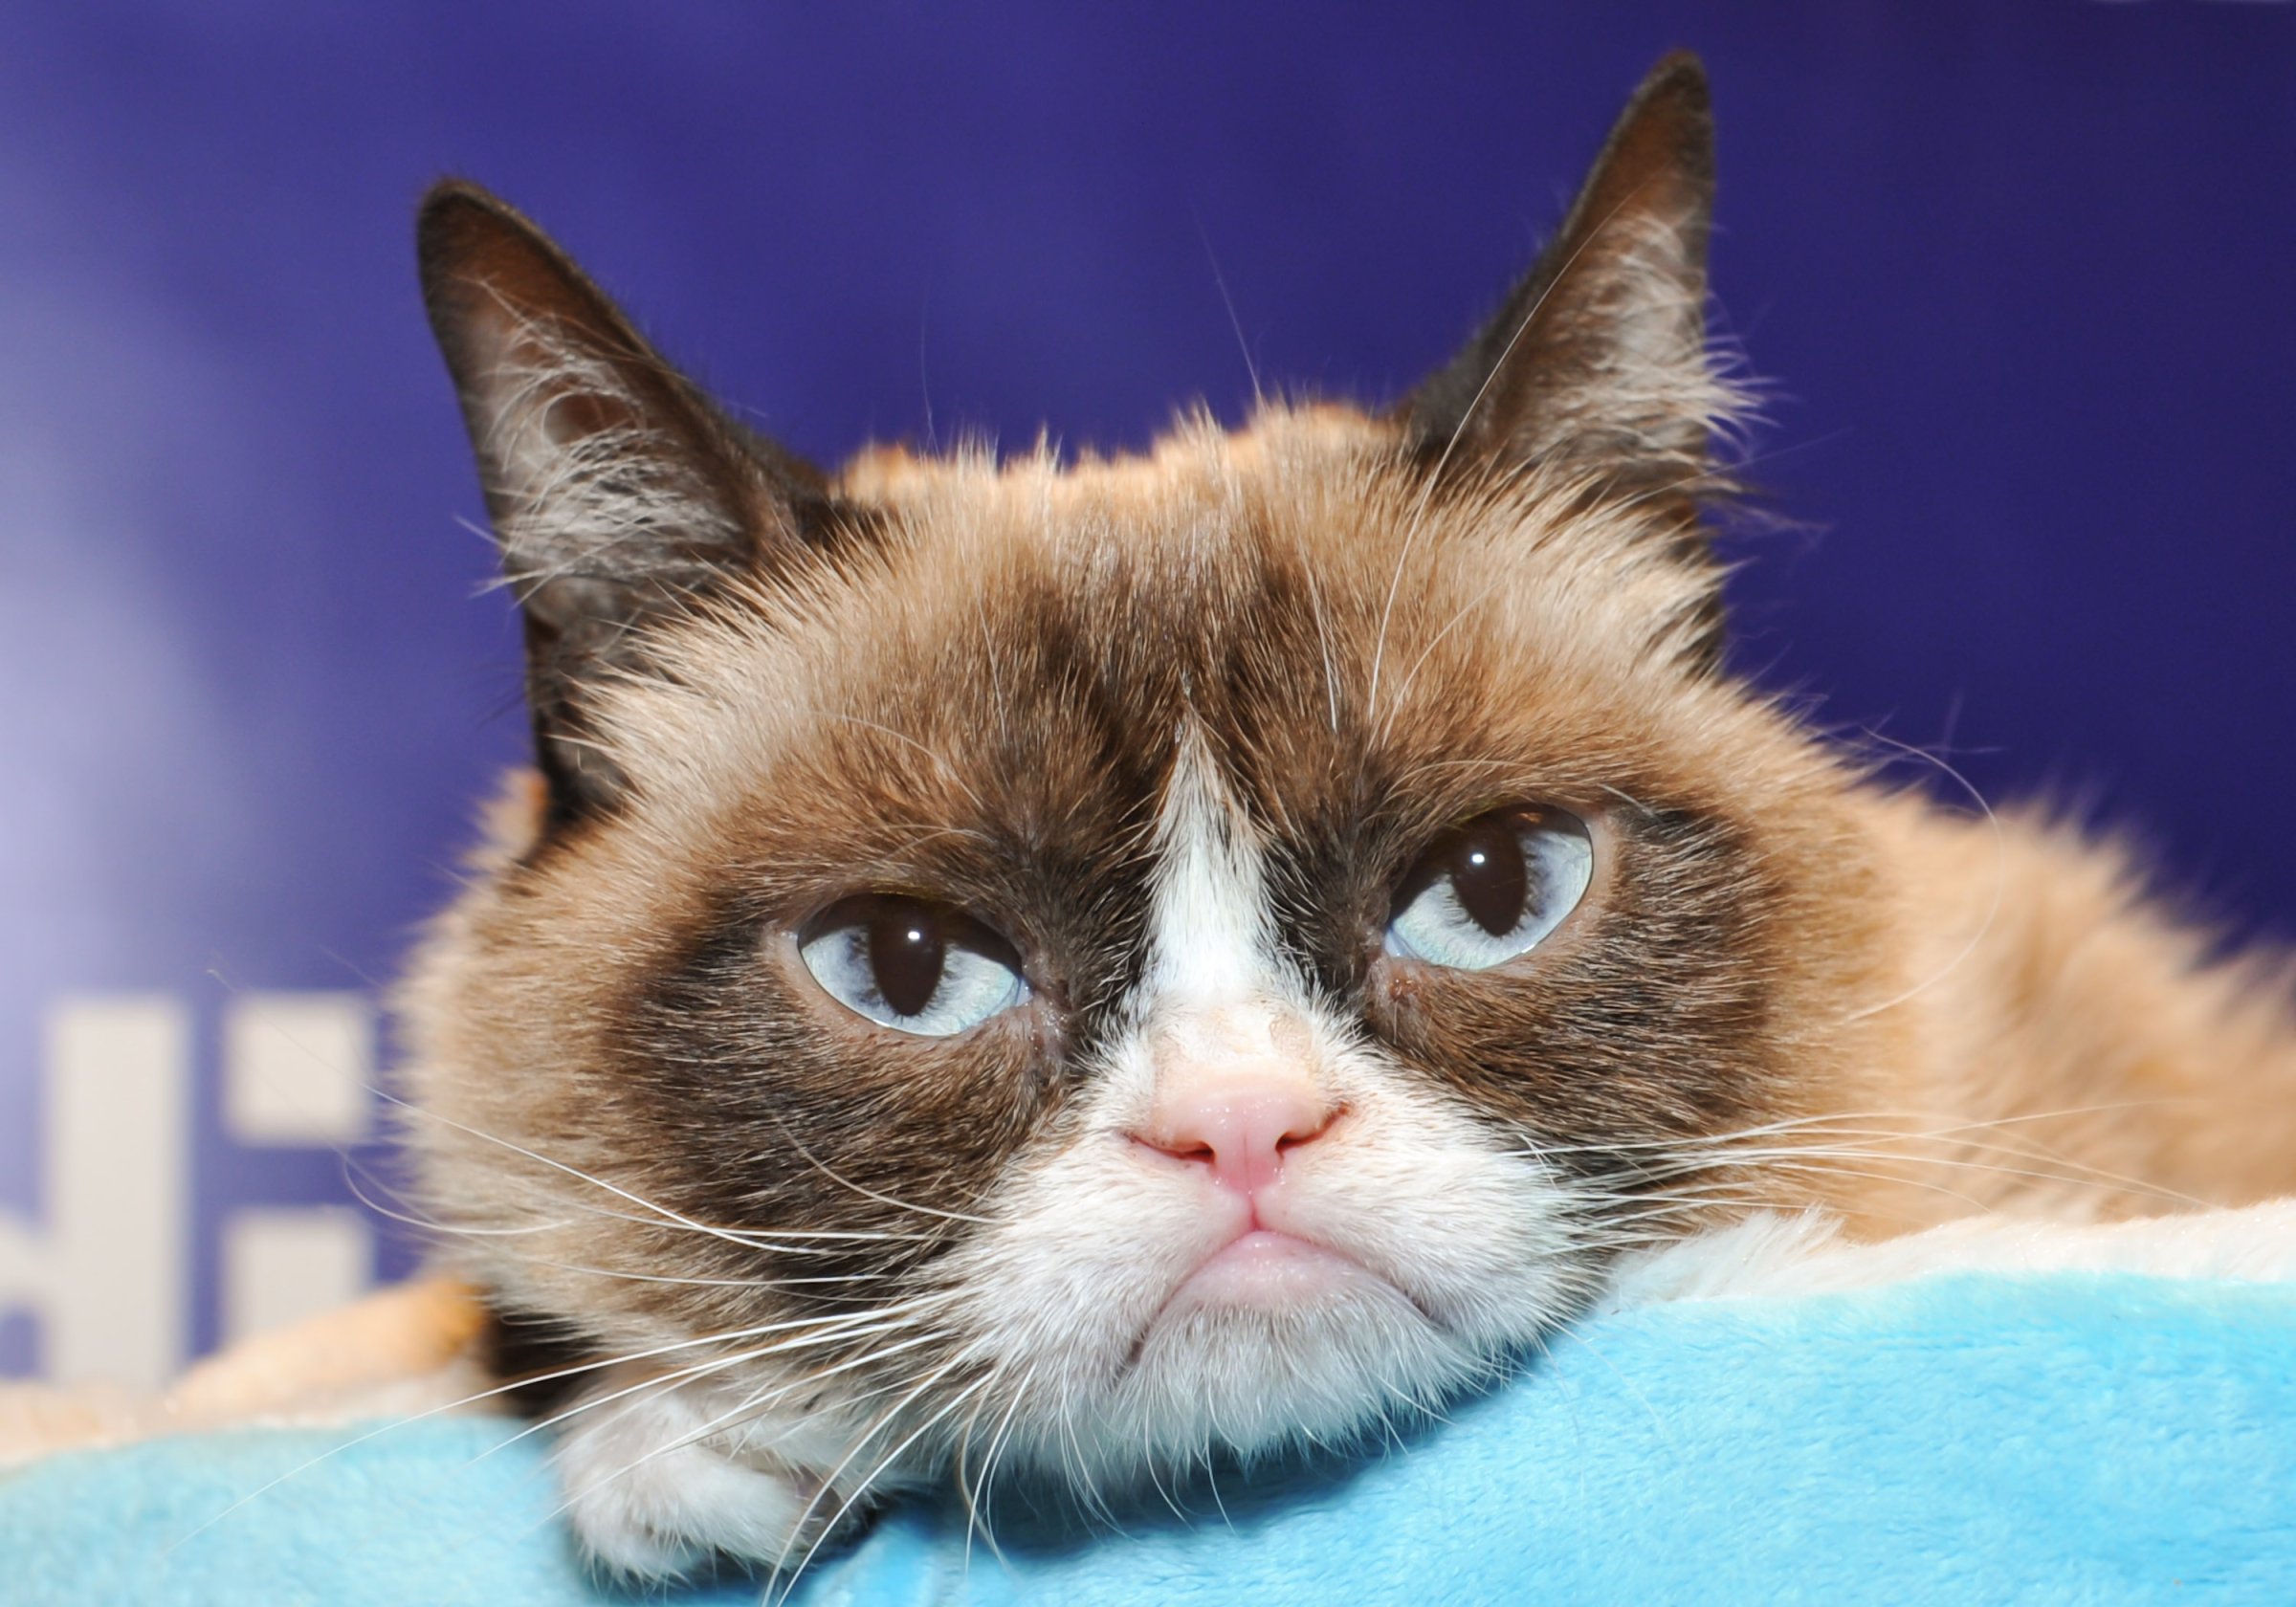 "Grumpy Guide To Life: Observations From Grumpy Cat" Book Event At Indigo